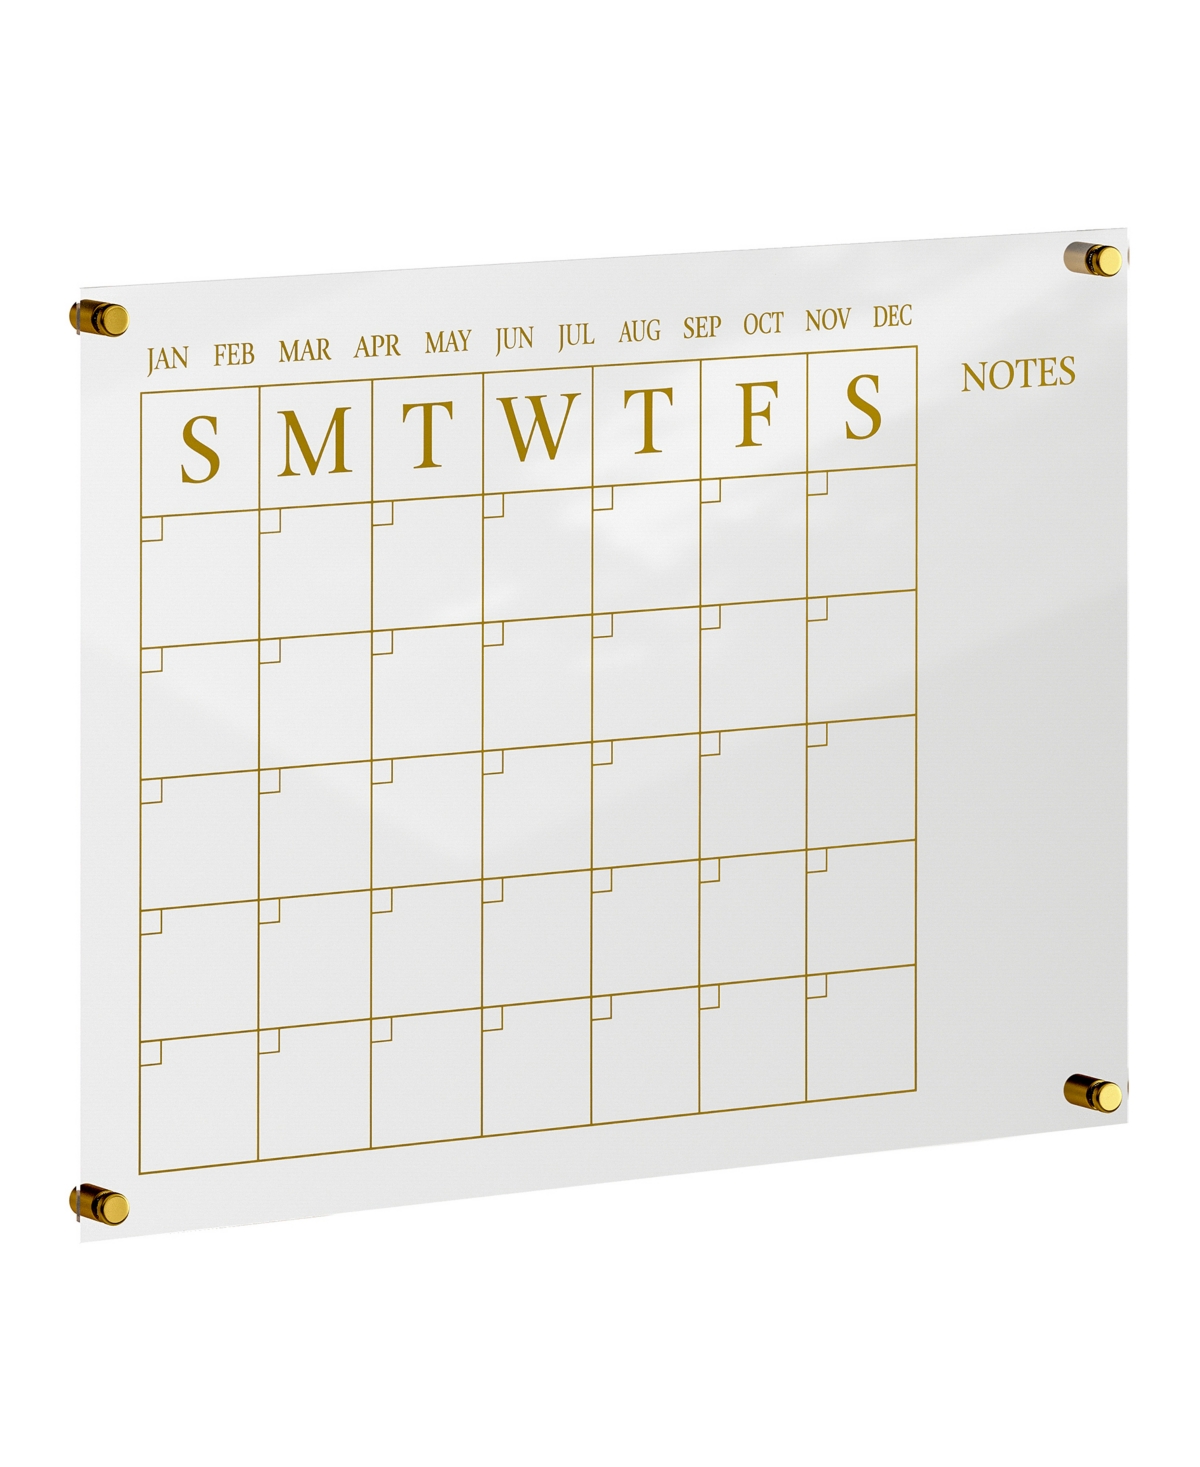 Grayson Acrylic Wall Calendar with Notes with Dry Erase Marker and Mounting Hardware, 24" x 18" - Clear, Gold